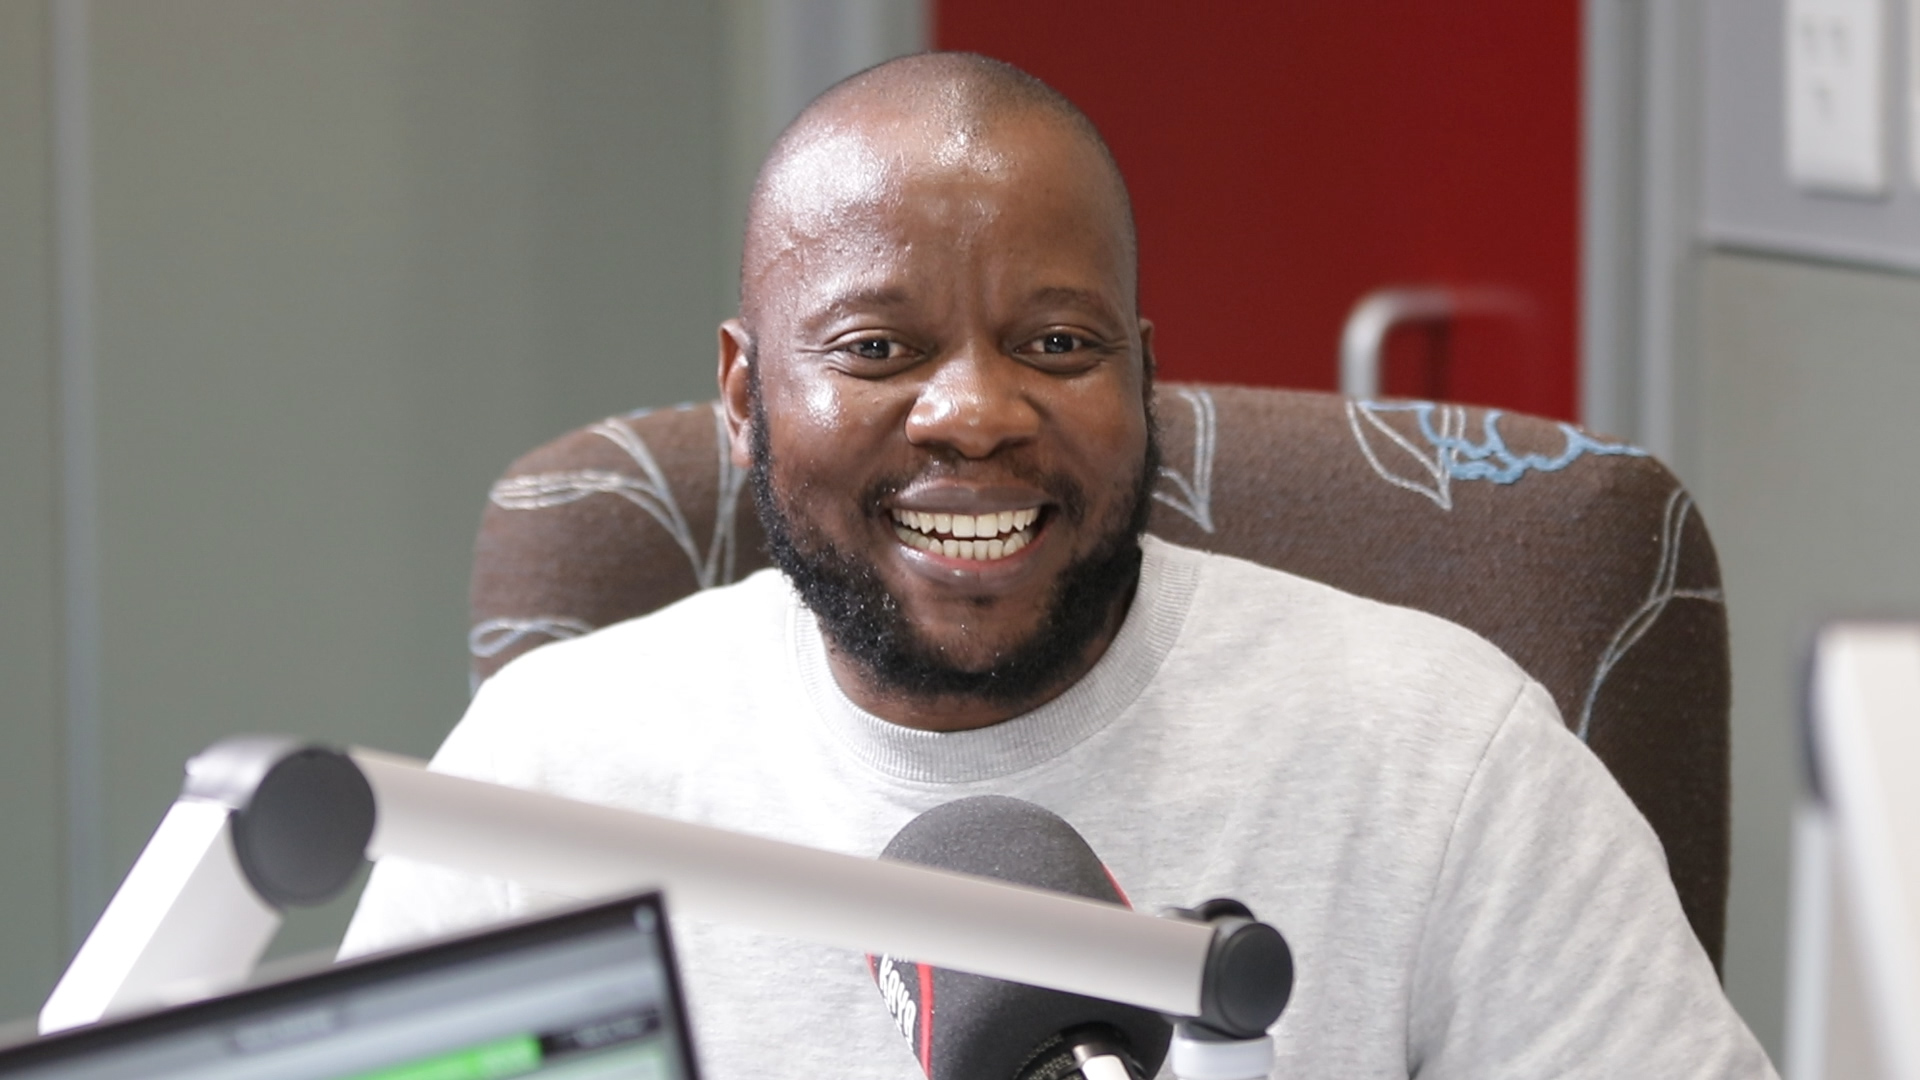 Sfiso Nene talks about his one man show “baby mama drama” with TBose on My Top 10 at 10